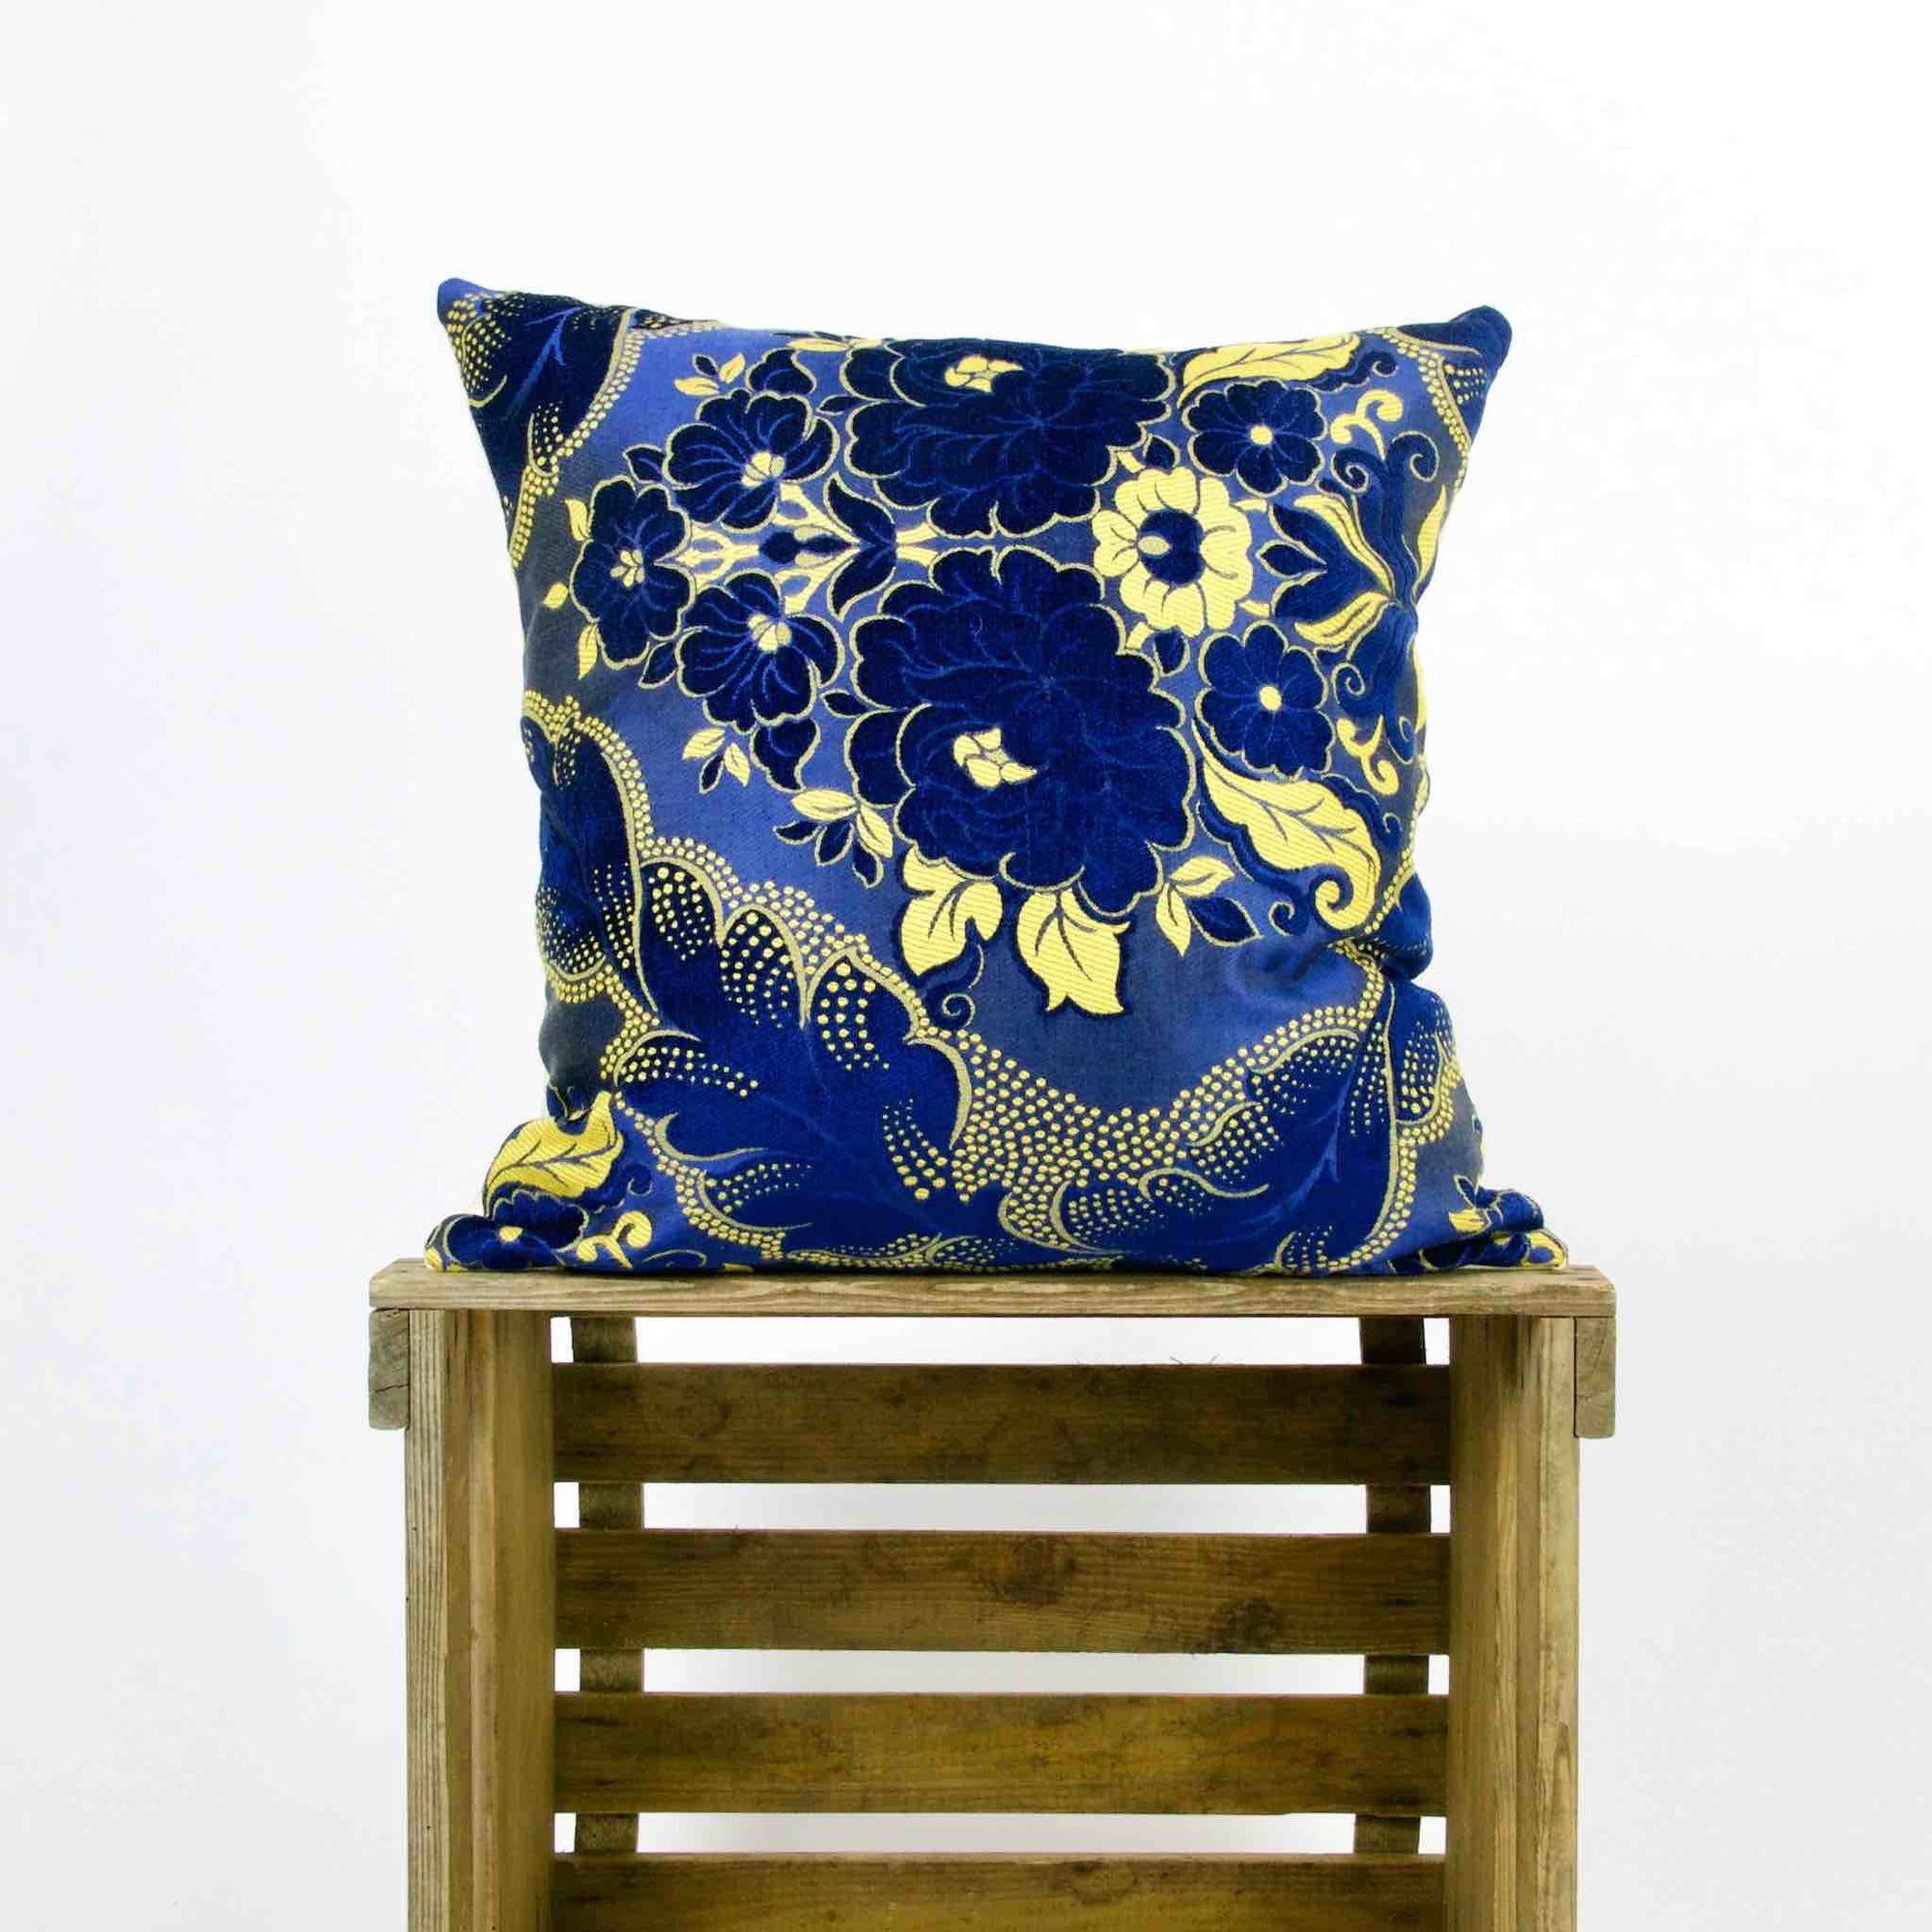 Yellow Blue sofa pillow standing on a wooden box